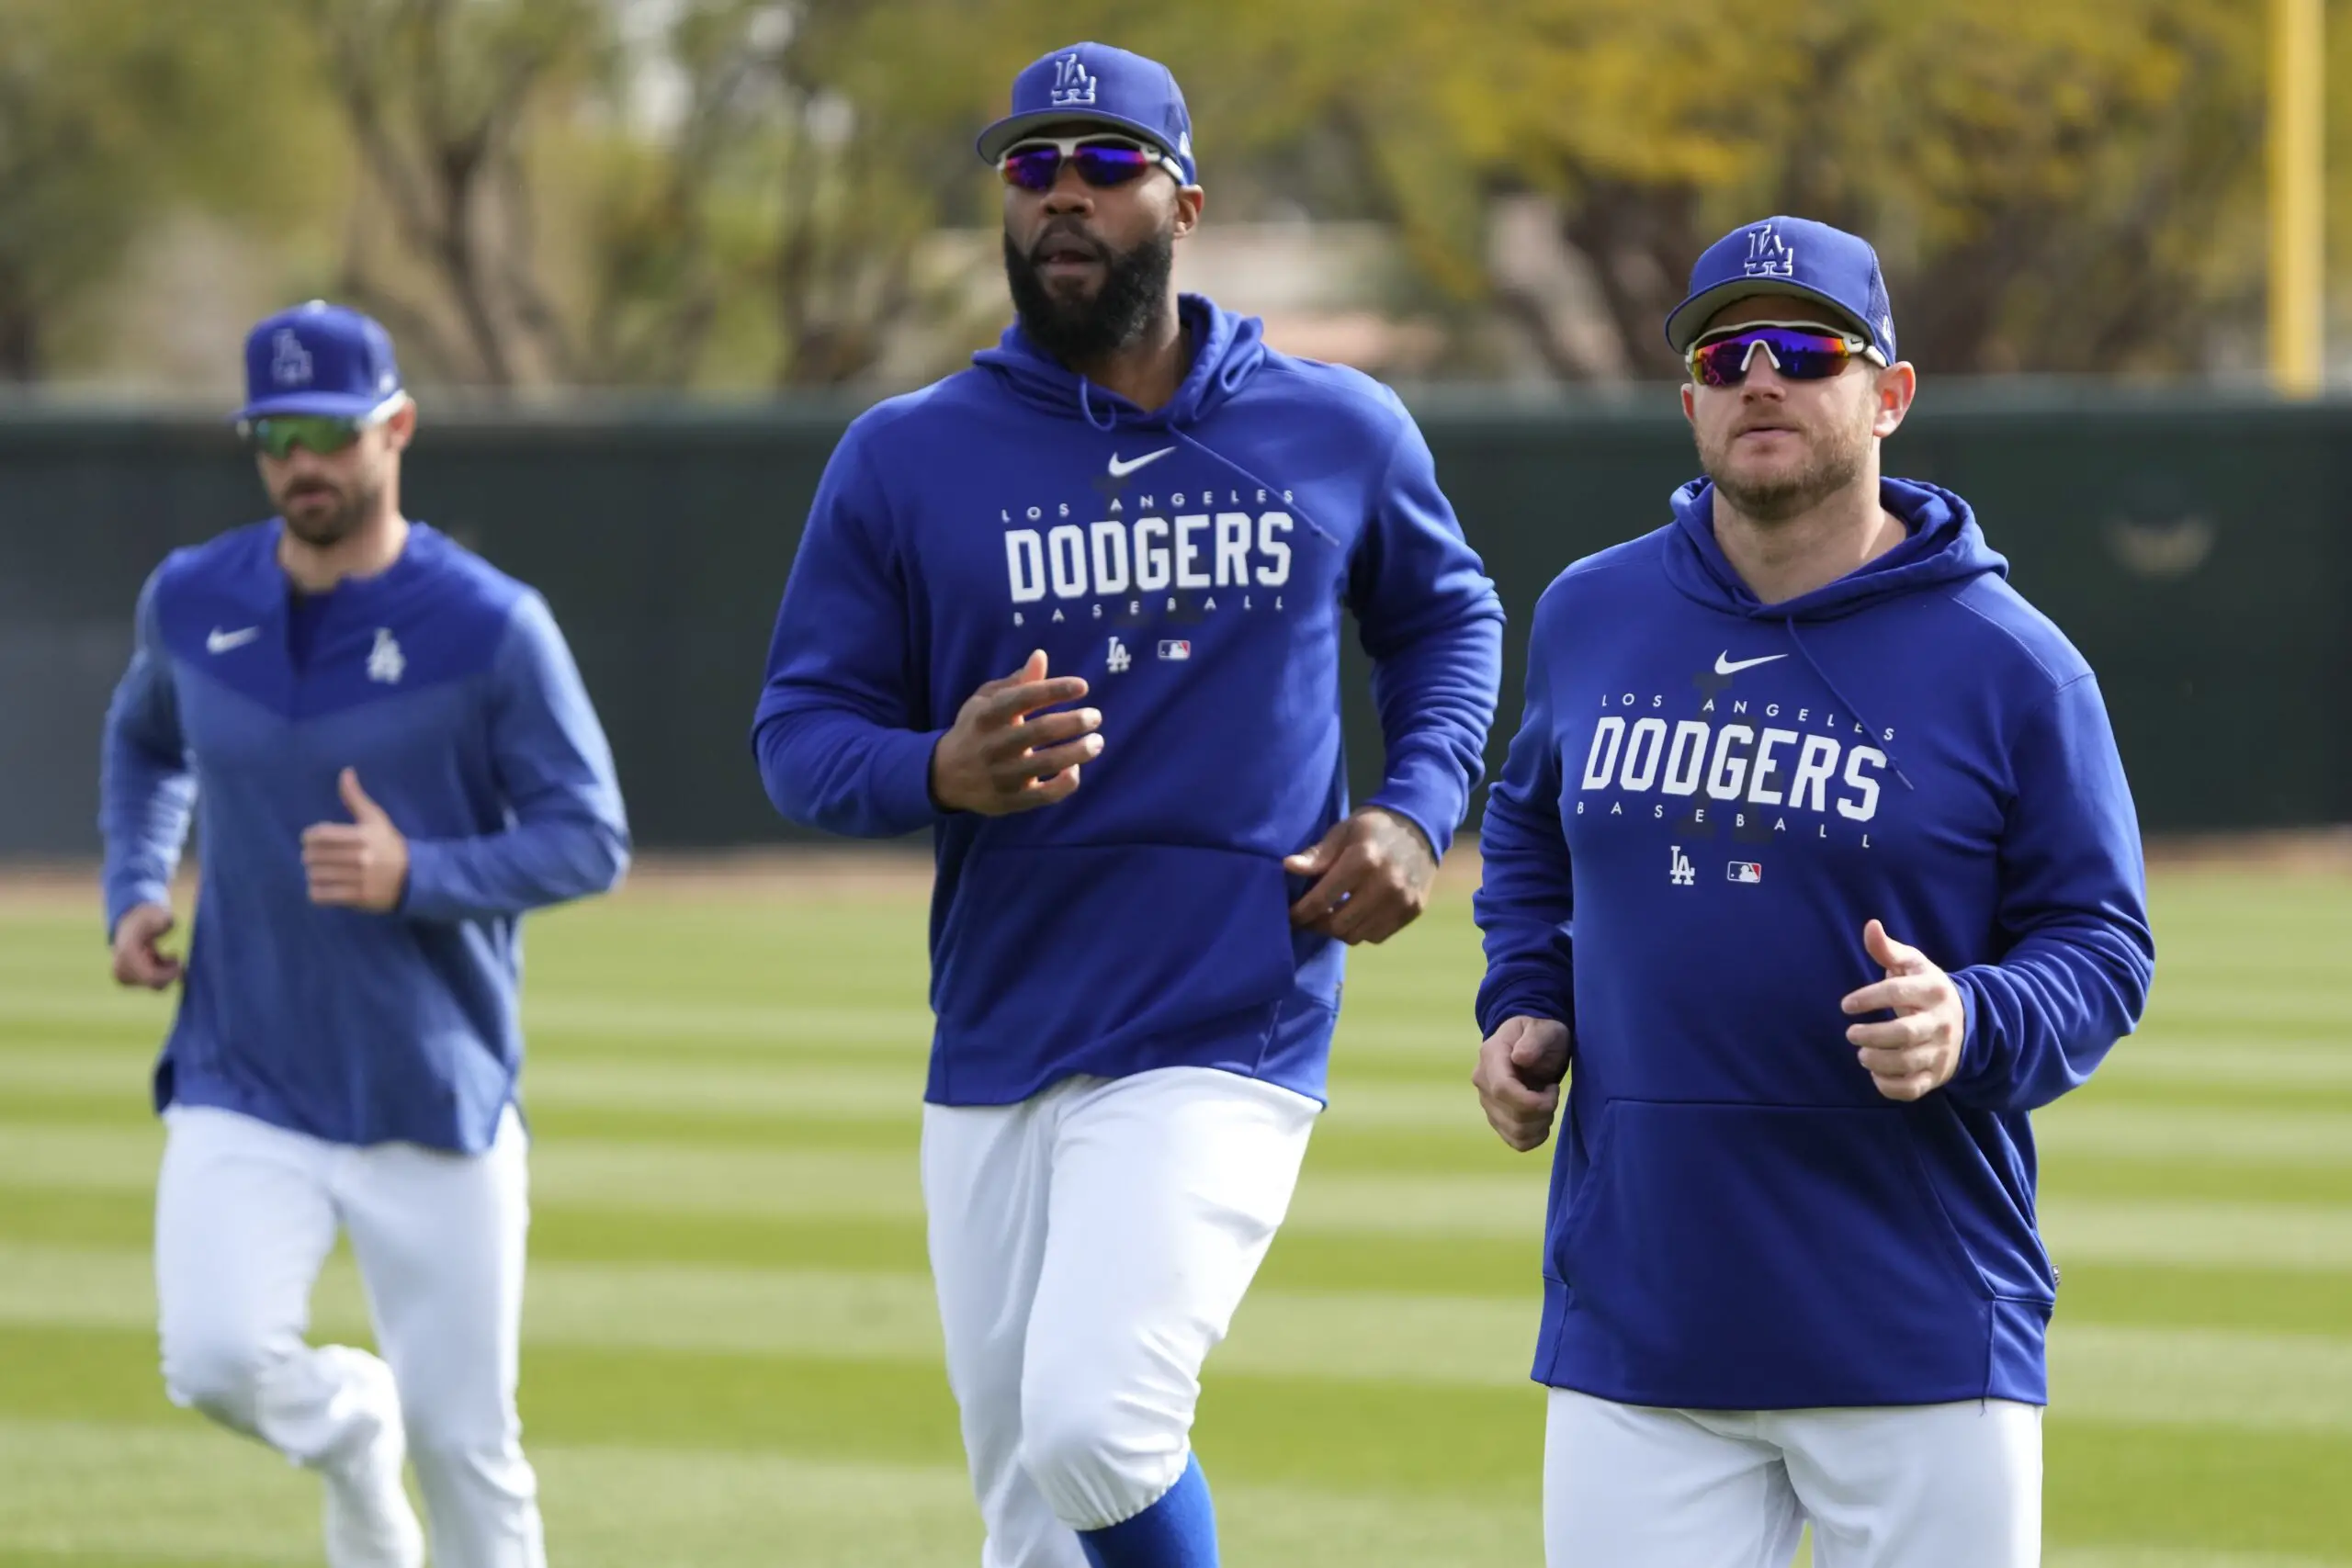 Dodgers OF Jason Heyward Left a Gift in All of His Teammates’ Lockers Ahead of Opening Day